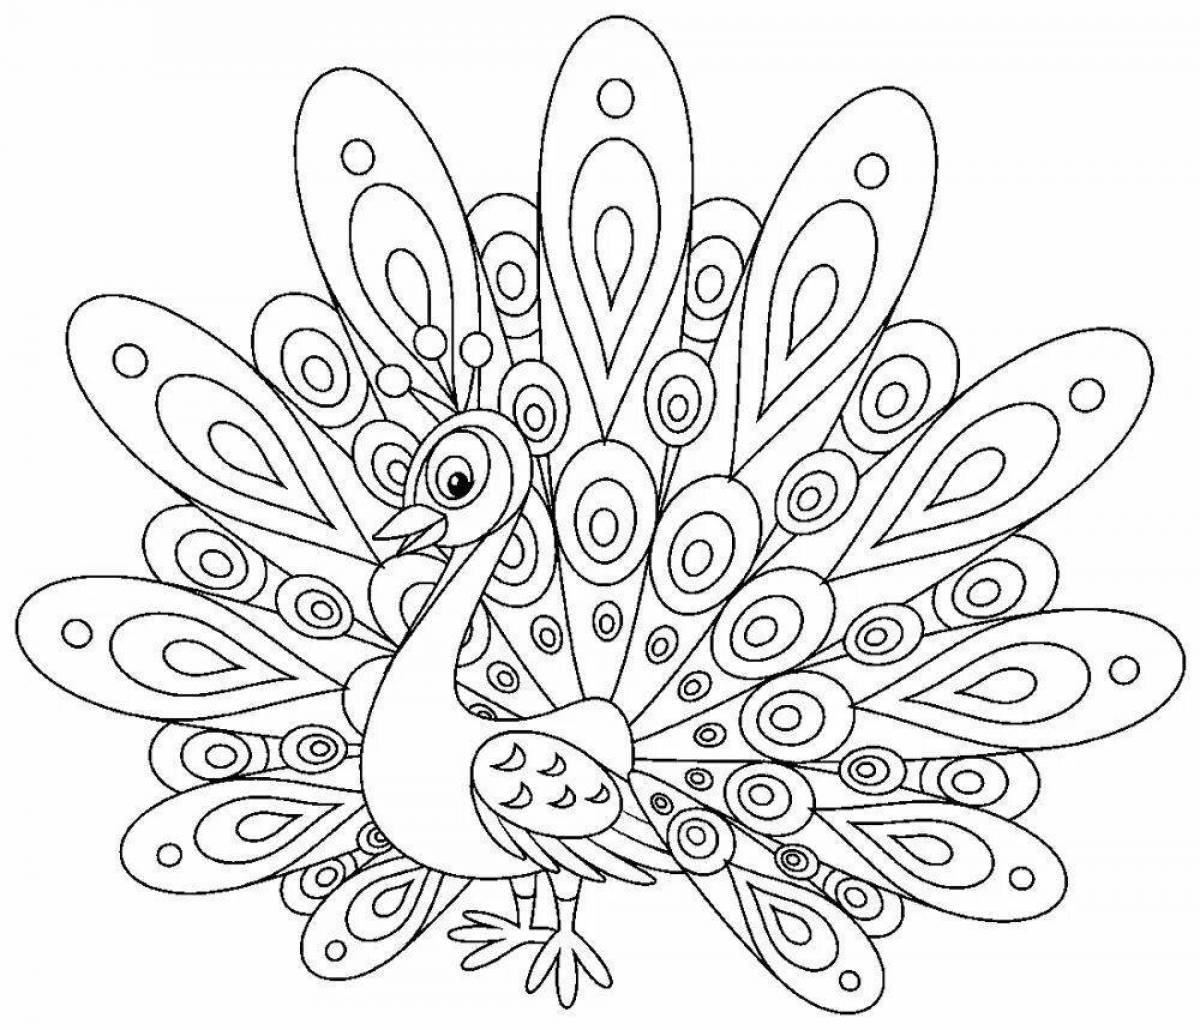 Elegant firebird coloring pages for kids